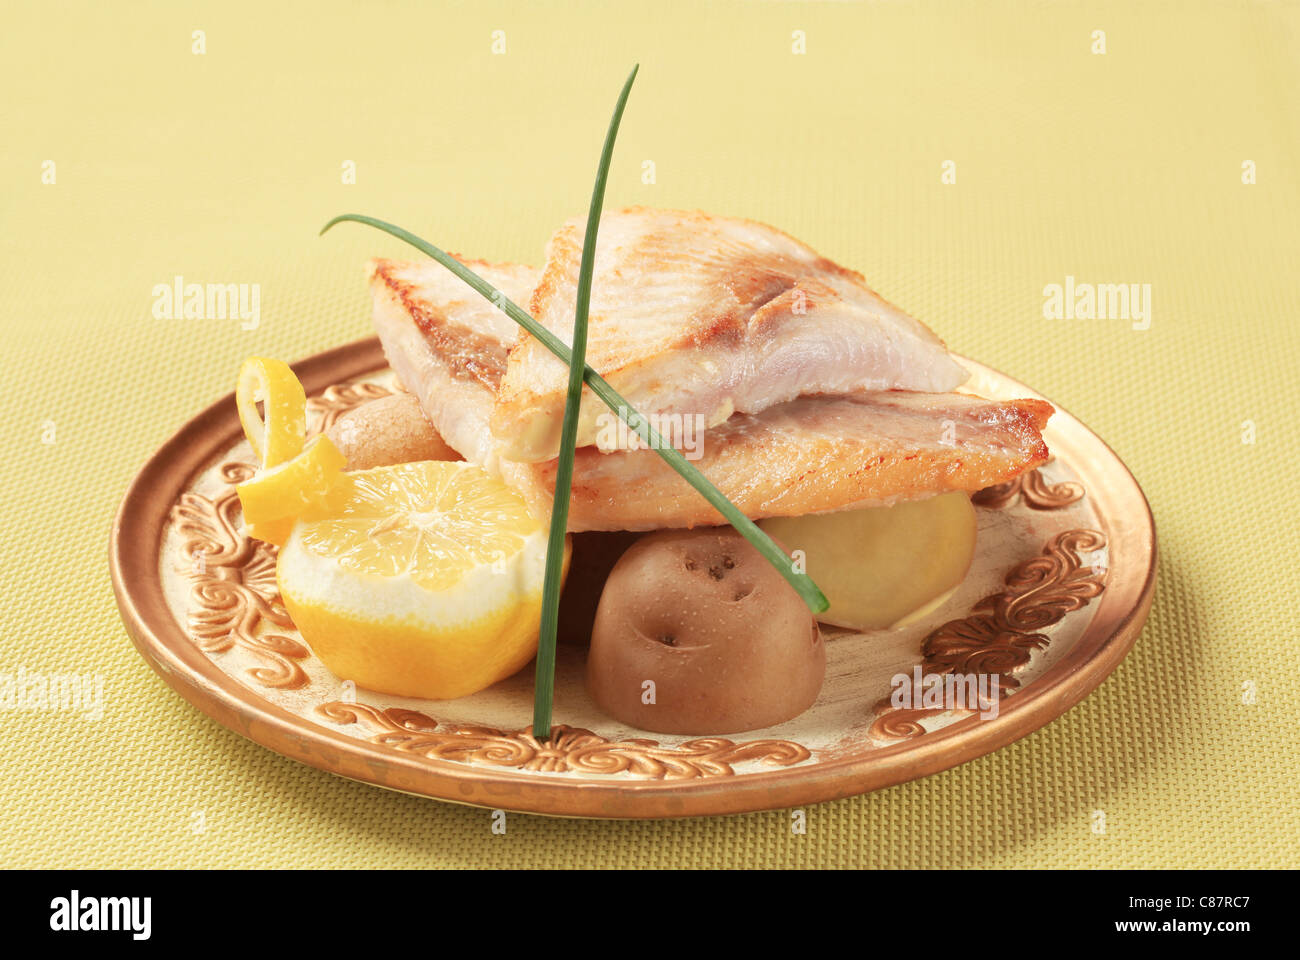 Pan fried white fish fillets with potatoes Stock Photo